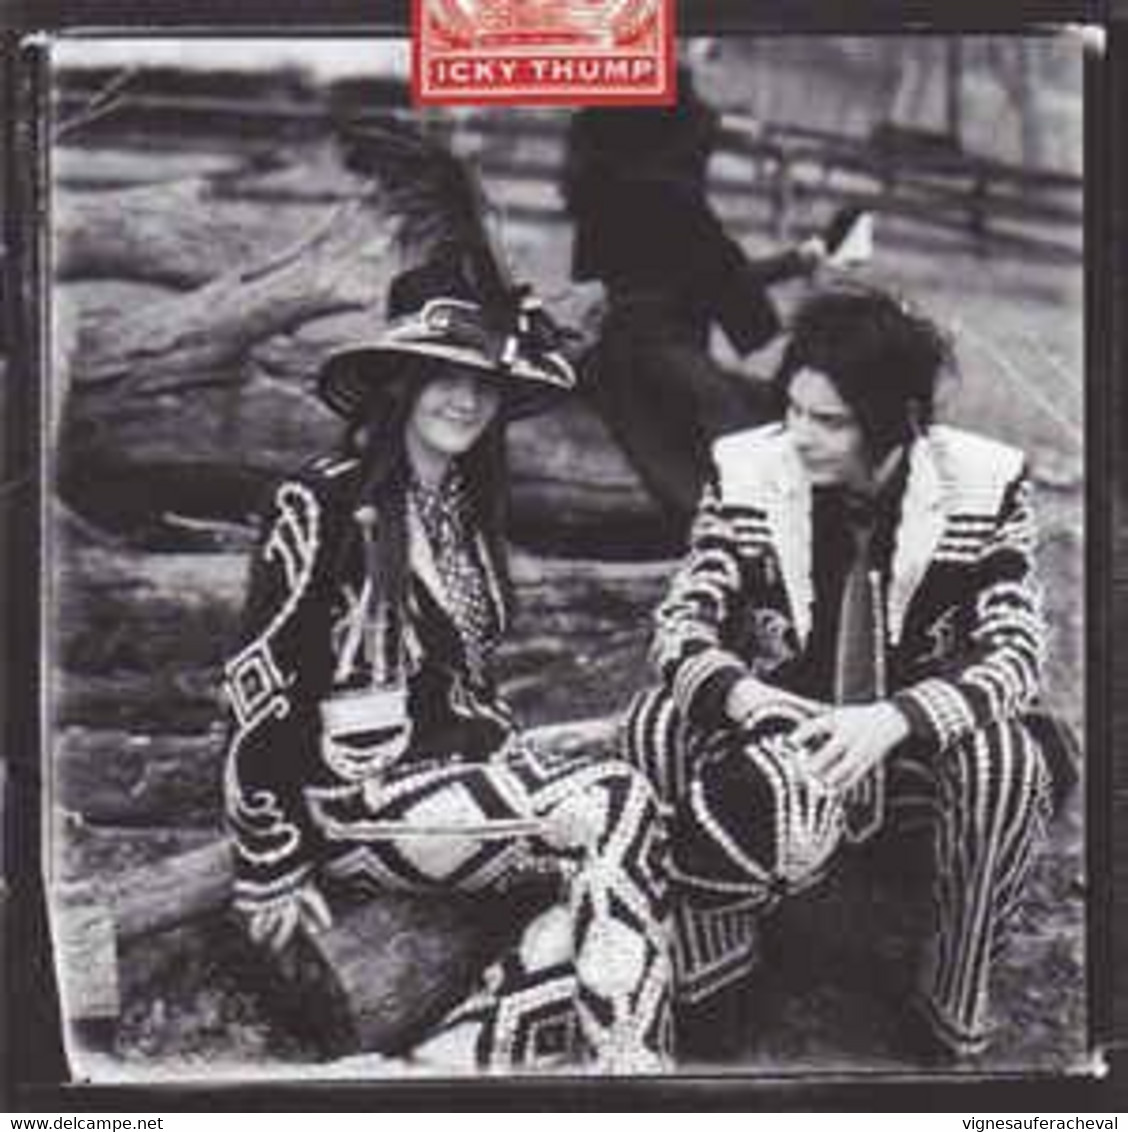 The White Stripes - Icky Thump Cd - Autres - Musique Anglaise